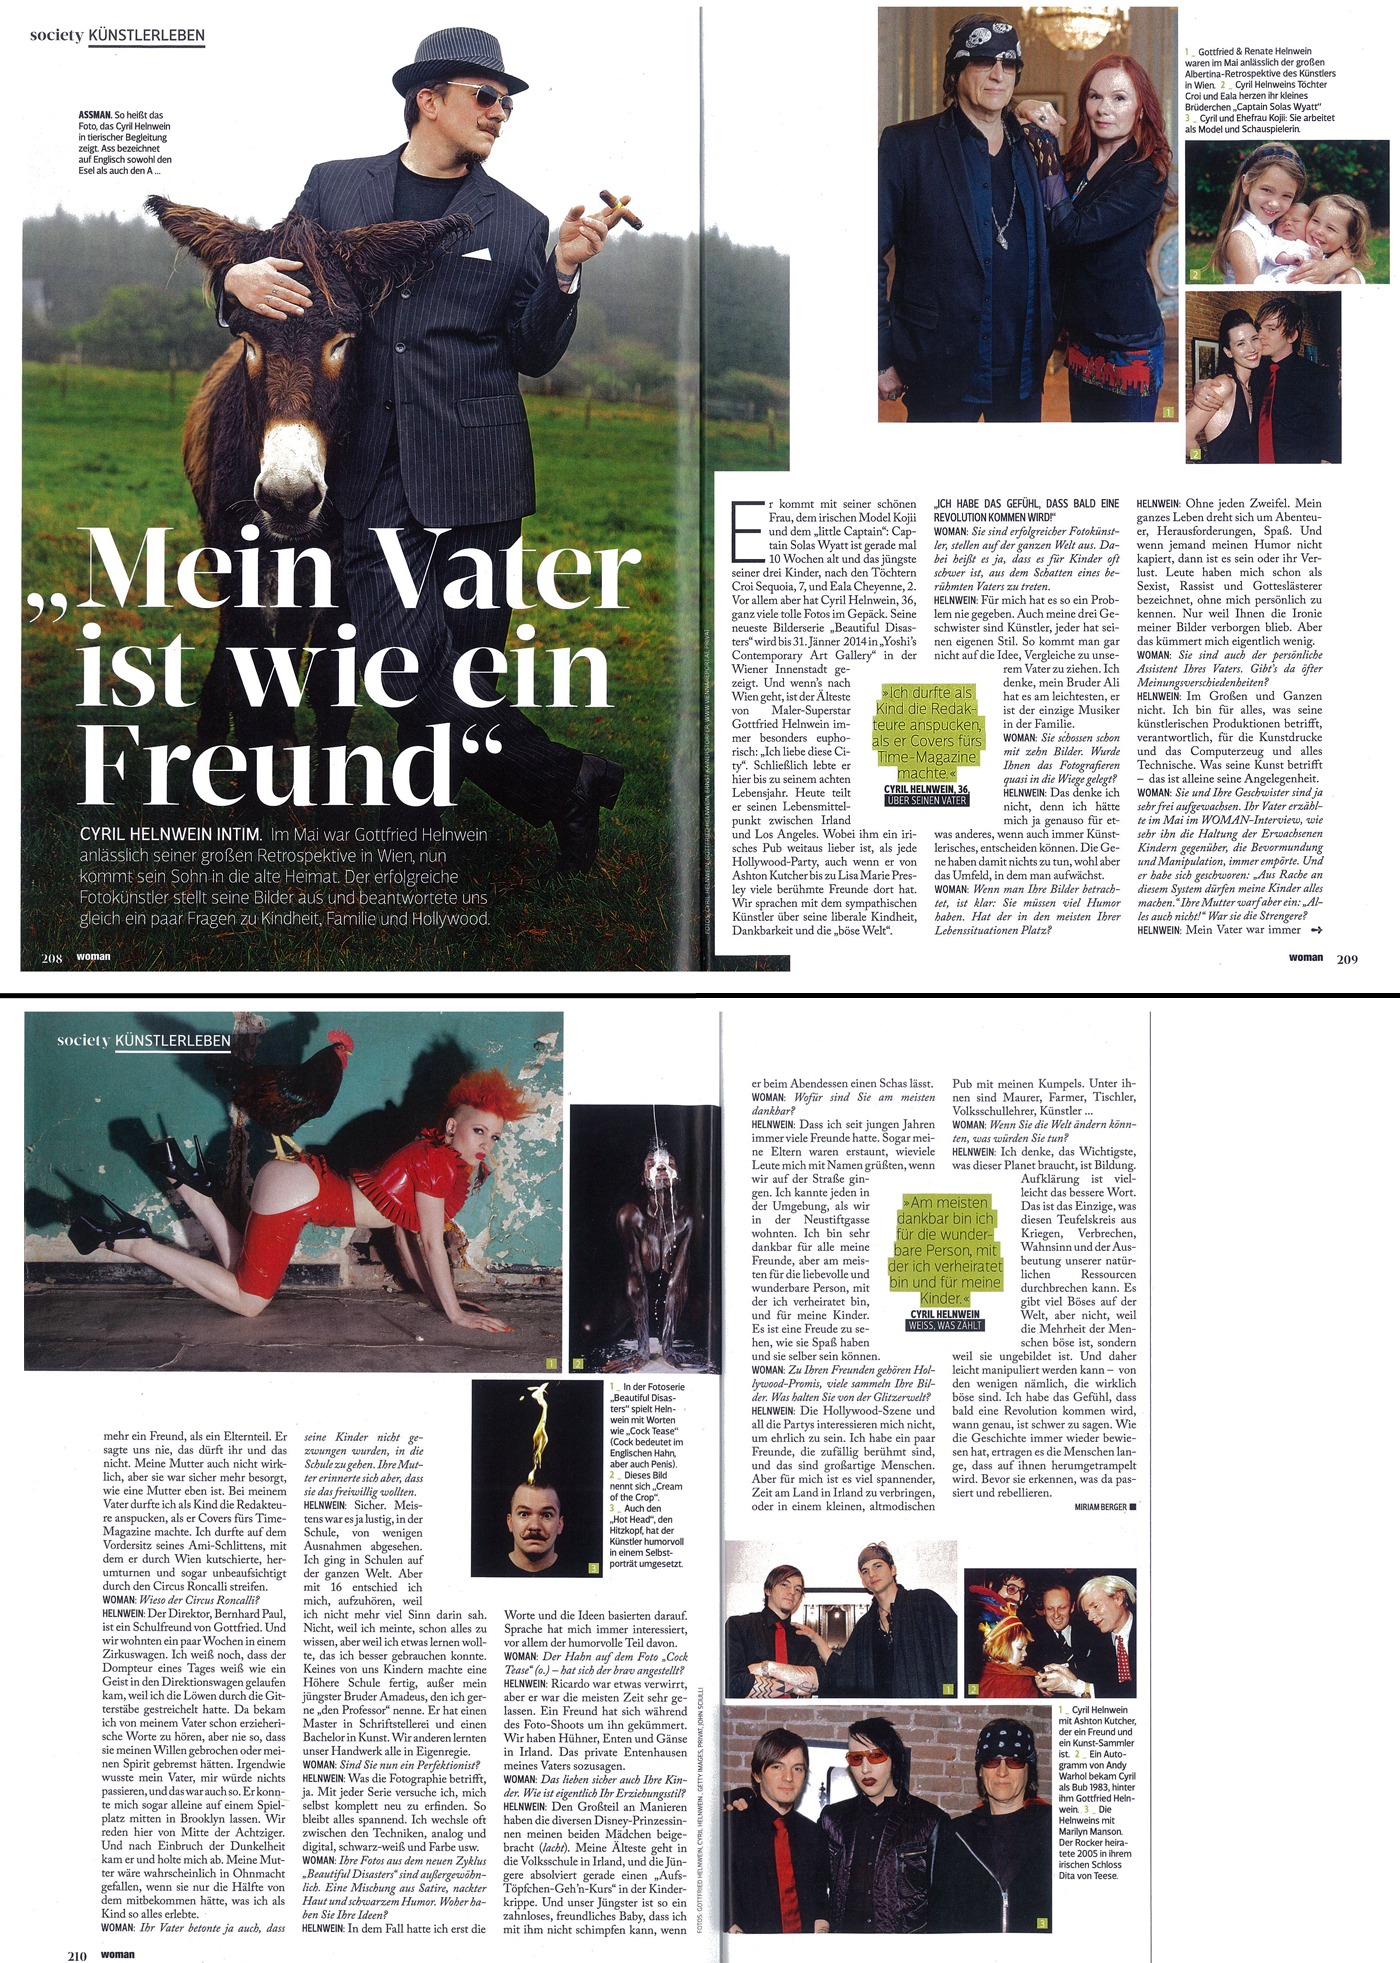 WOMAN magazine article and interview, Cyril Helnwein